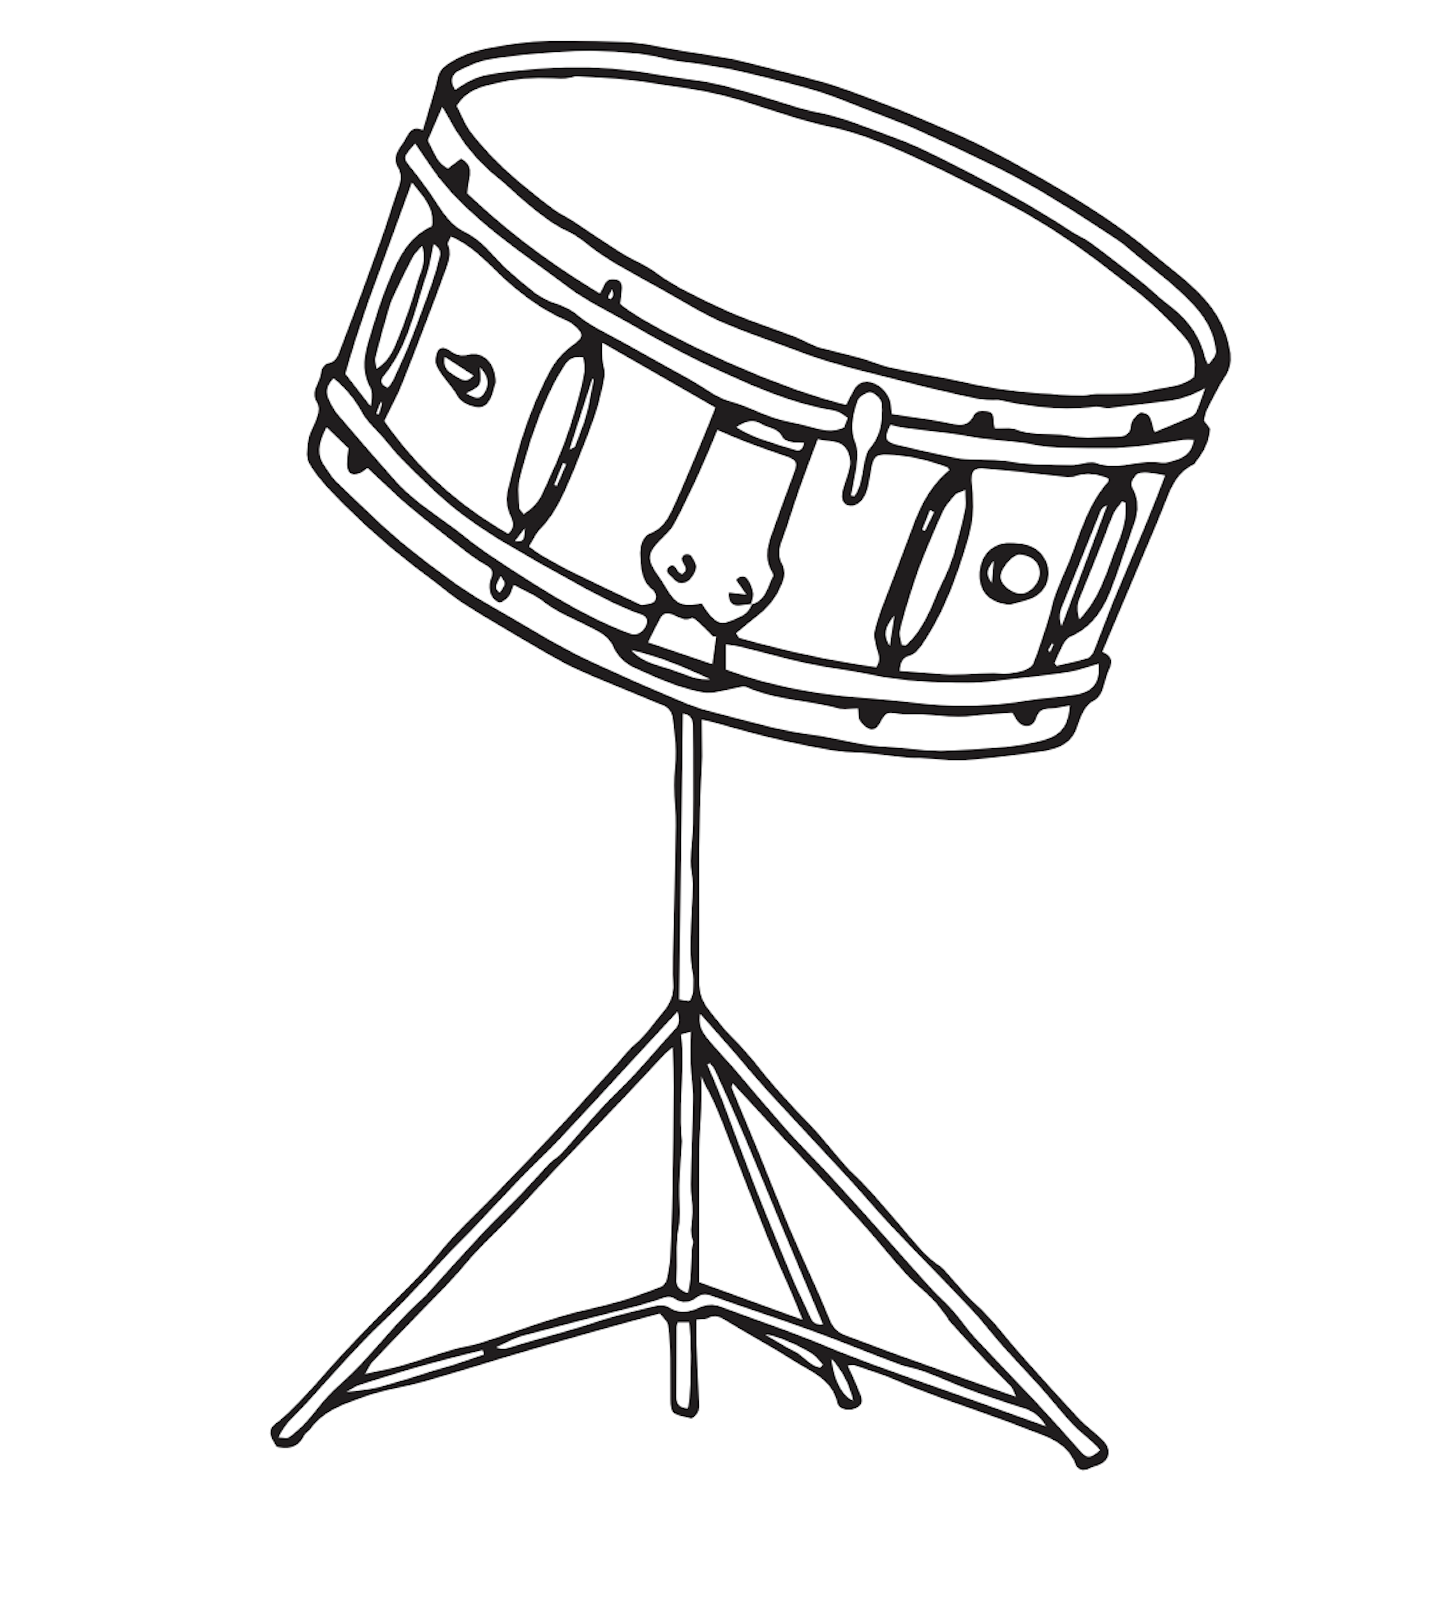 San Francisco Symphony - Instrument of the Month: Snare Drum